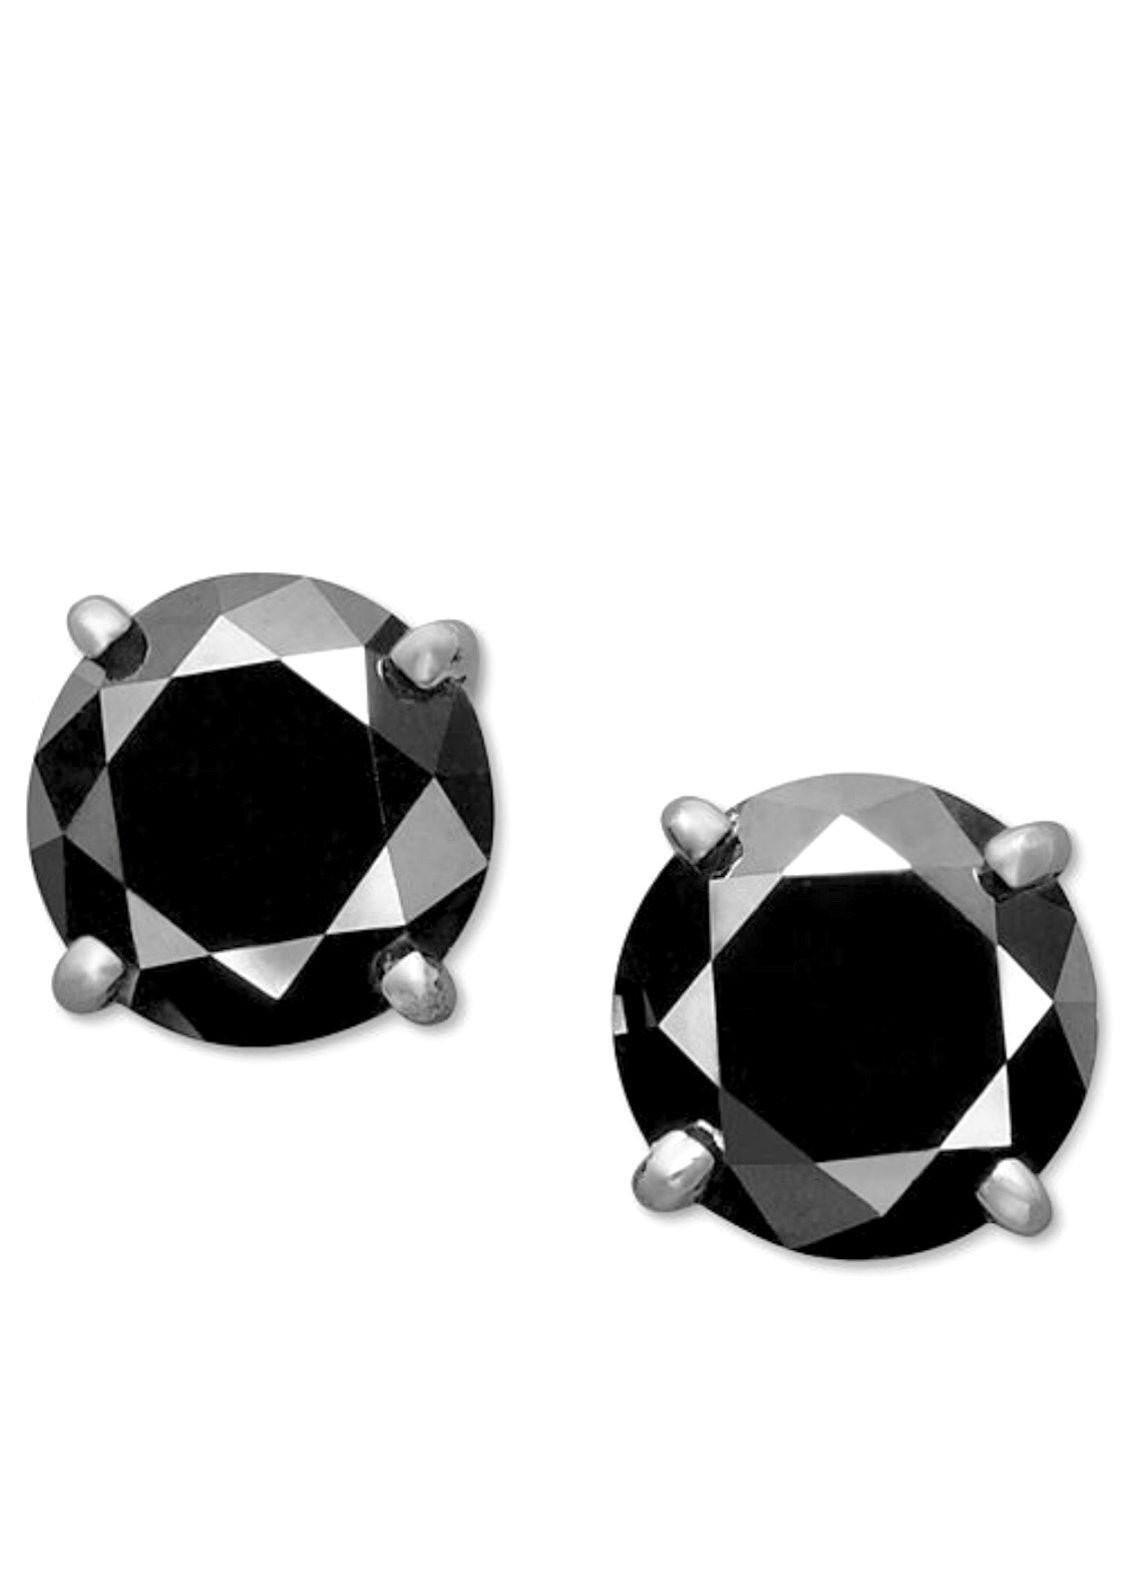 
Custom made Black Diamond studs for Ballerina earrings. 

Center Stones: 

2 Black Diamonds- Round 
2.76 Carat Total  Weight

Gold - White Gold 18K, push back closure.
Earrings come in a classic jewelry box. 
